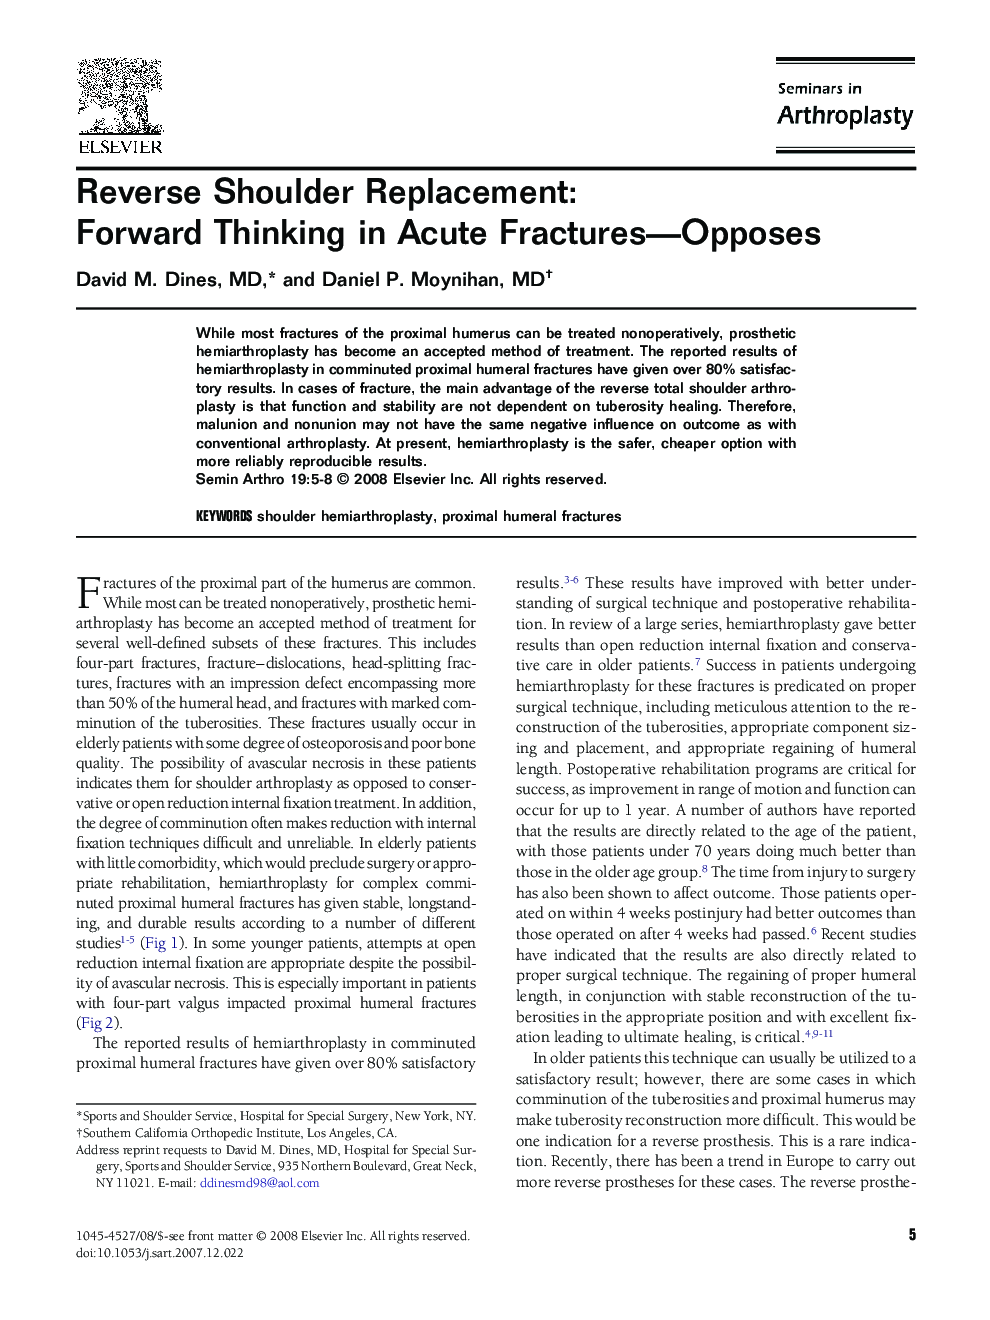 Reverse Shoulder Replacement: Forward Thinking in Acute Fractures—Opposes